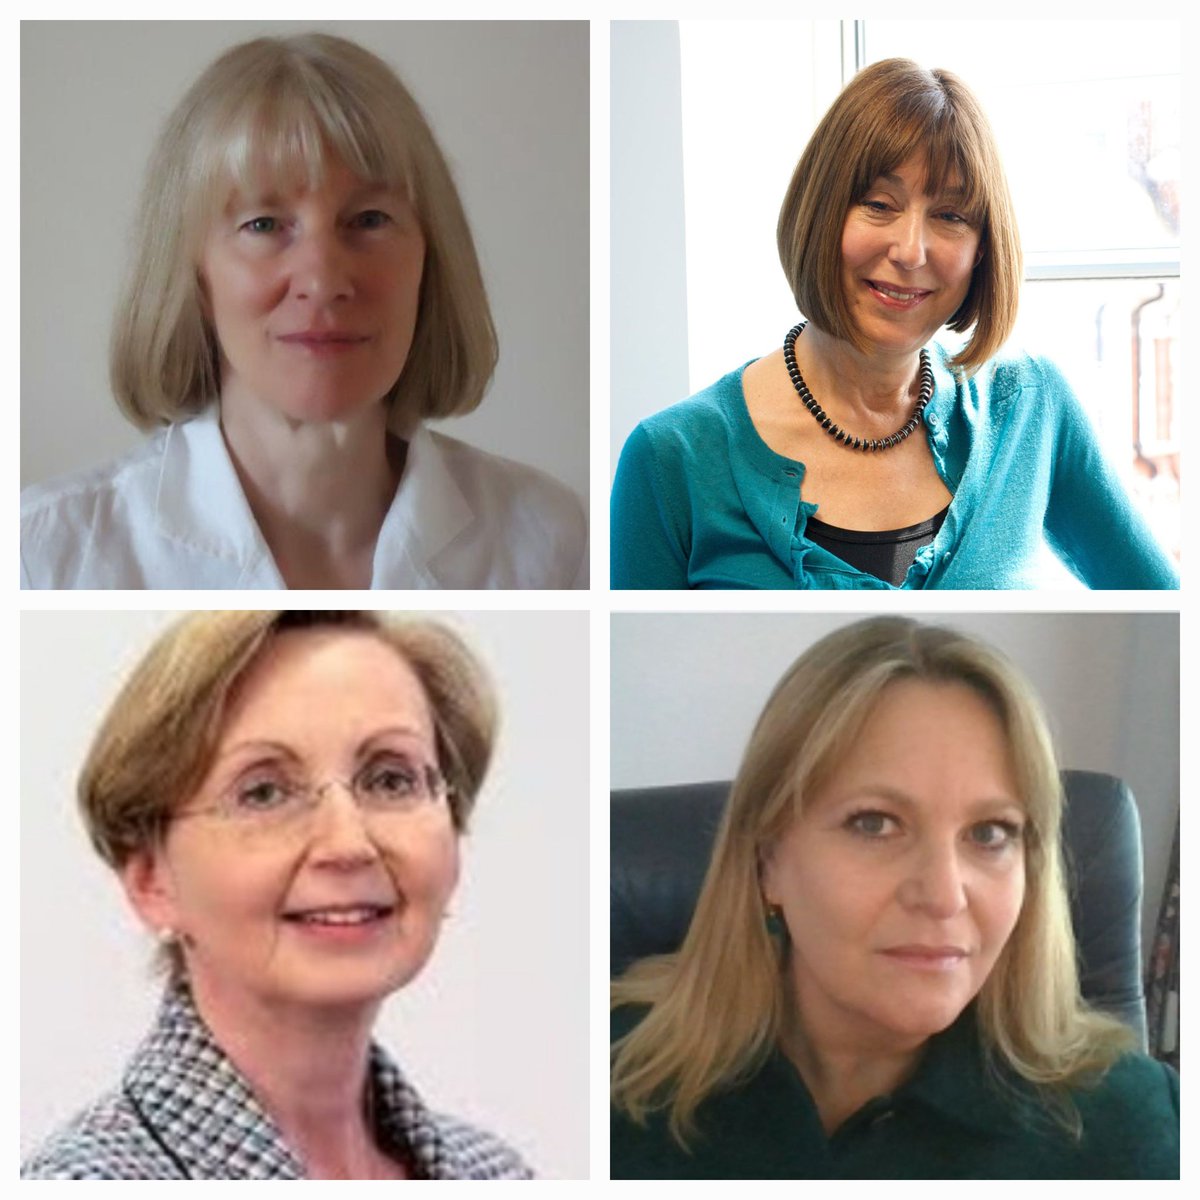 Celebrating the careers of Stephen Duffy and Jack Cuzick is making me think of these 4 brilliant women who all died before we could do the same for them. Remembering Jane Wardle, Wendy Atkin, Anne Szarewski and Louise Cadman and their huge contributions to cancer research